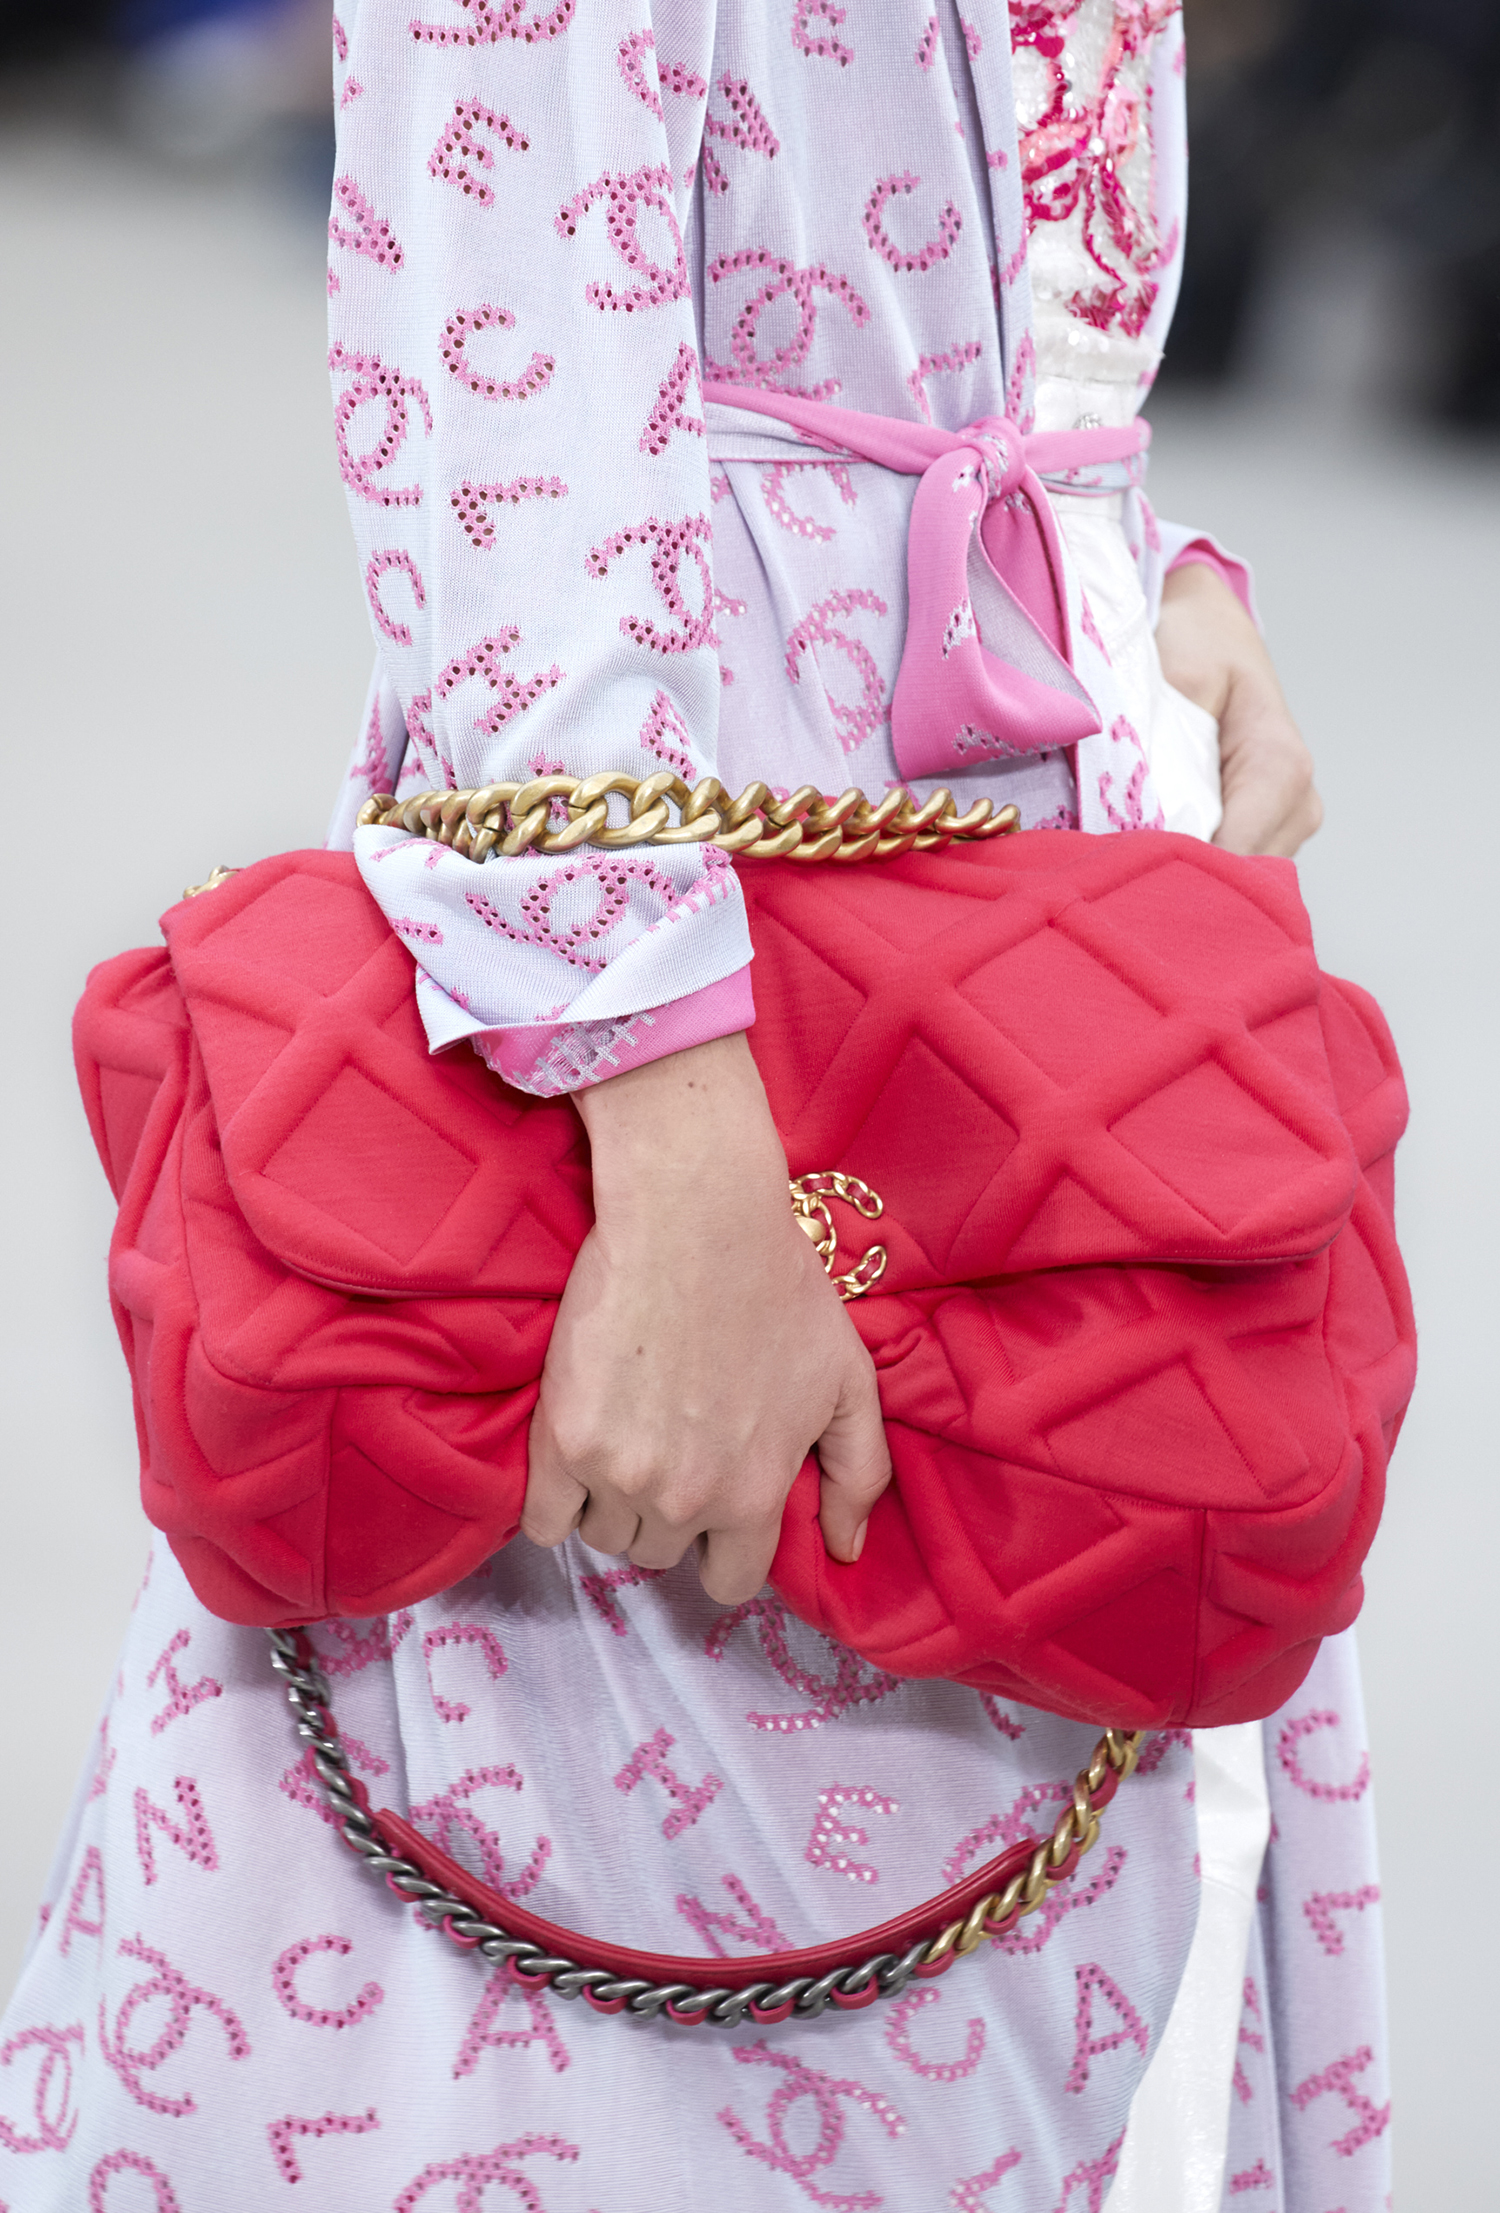 The Chanel 19: The Newest Must Have Chanel Bag